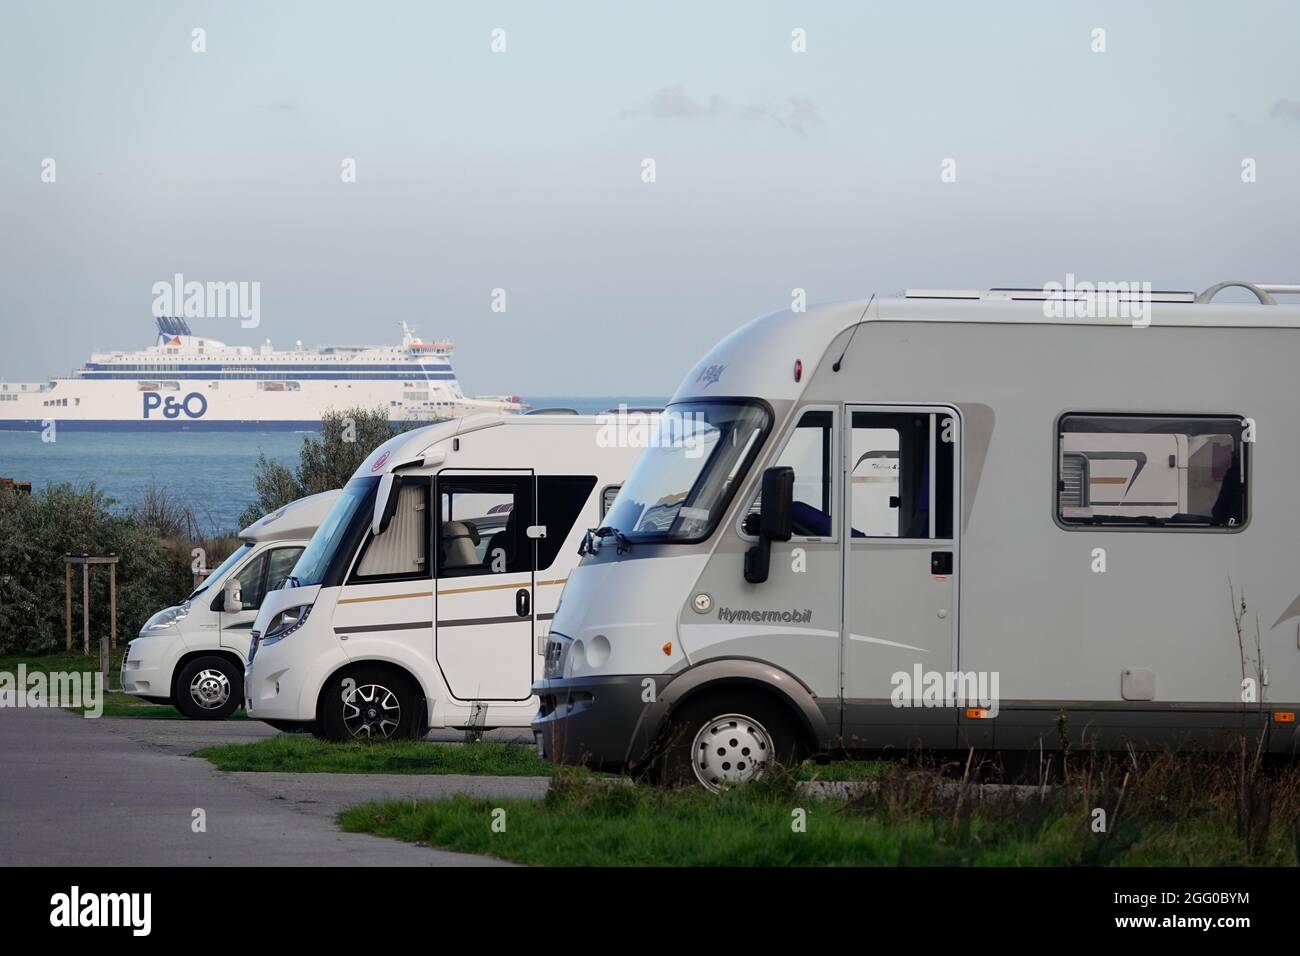 Motorhomes parked in a French Aire (motorhome parking for staying overnight) at Sangatte, Calais, France. The aire overlooks the Enlish channel. Stock Photo